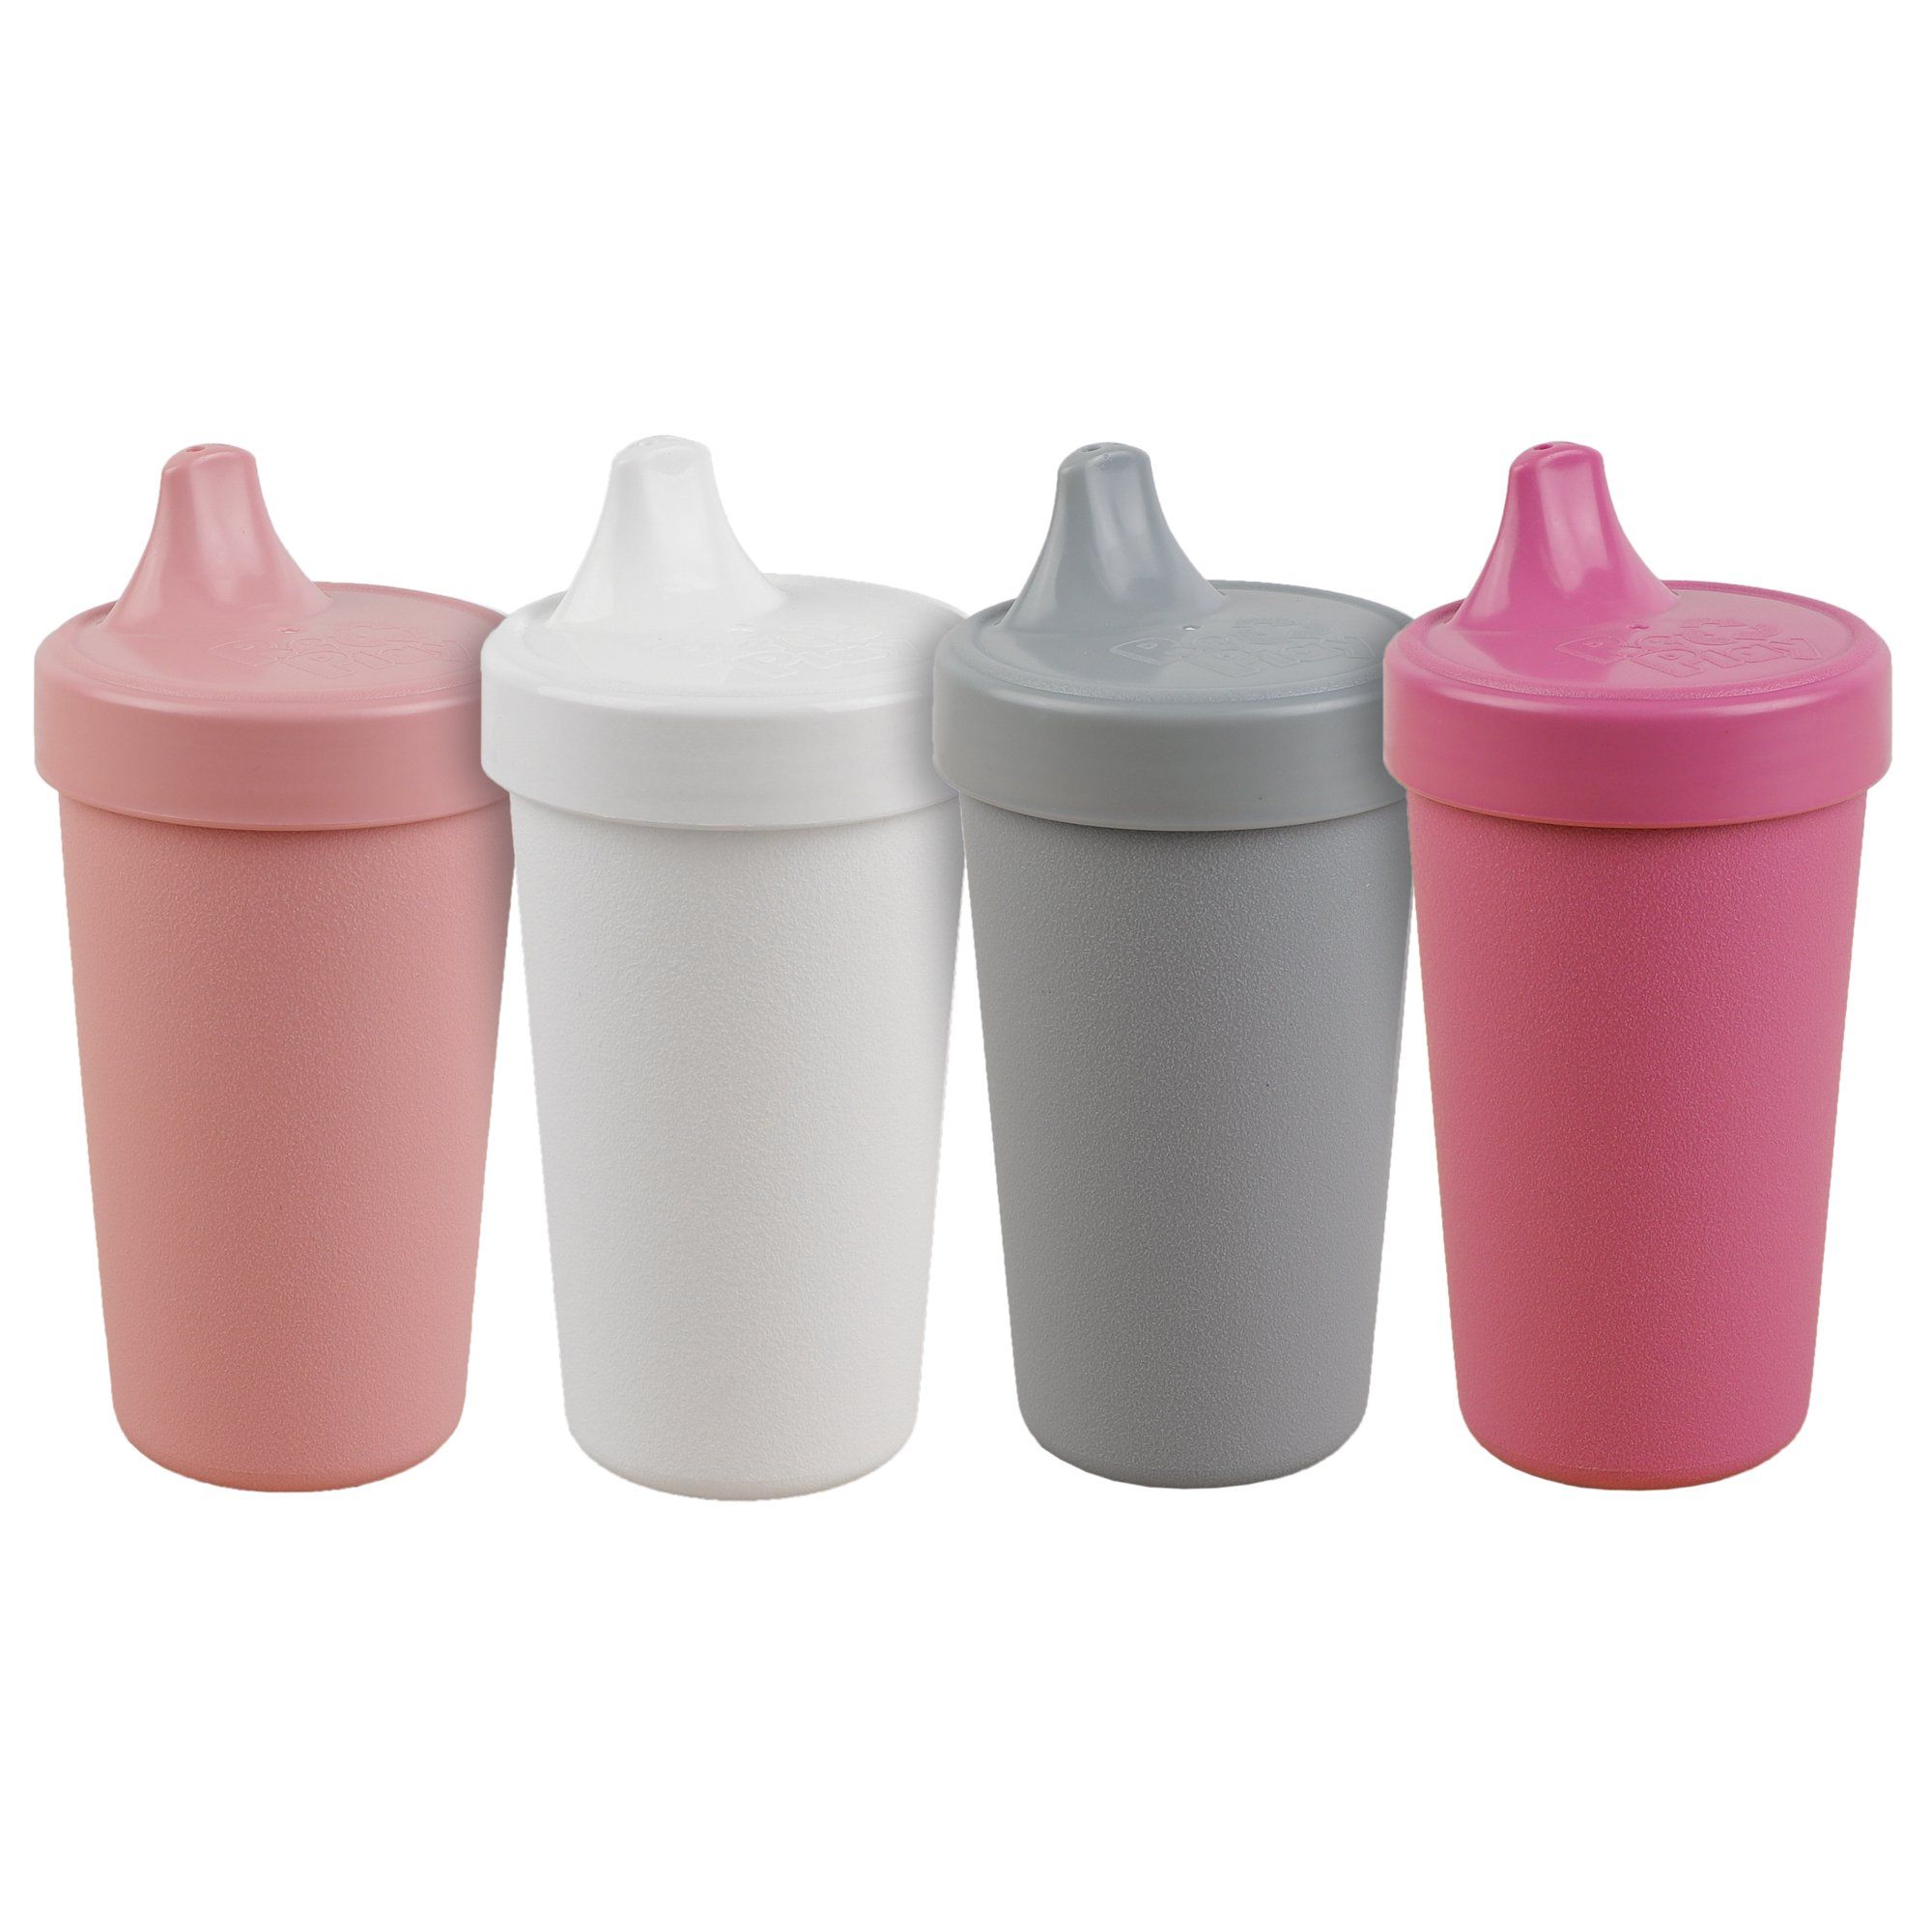 Re-Play Made in The USA 4pk No Spill Sippy Cups for Baby, Toddler, and Child Feeding in Blush, Wh... | Walmart (US)